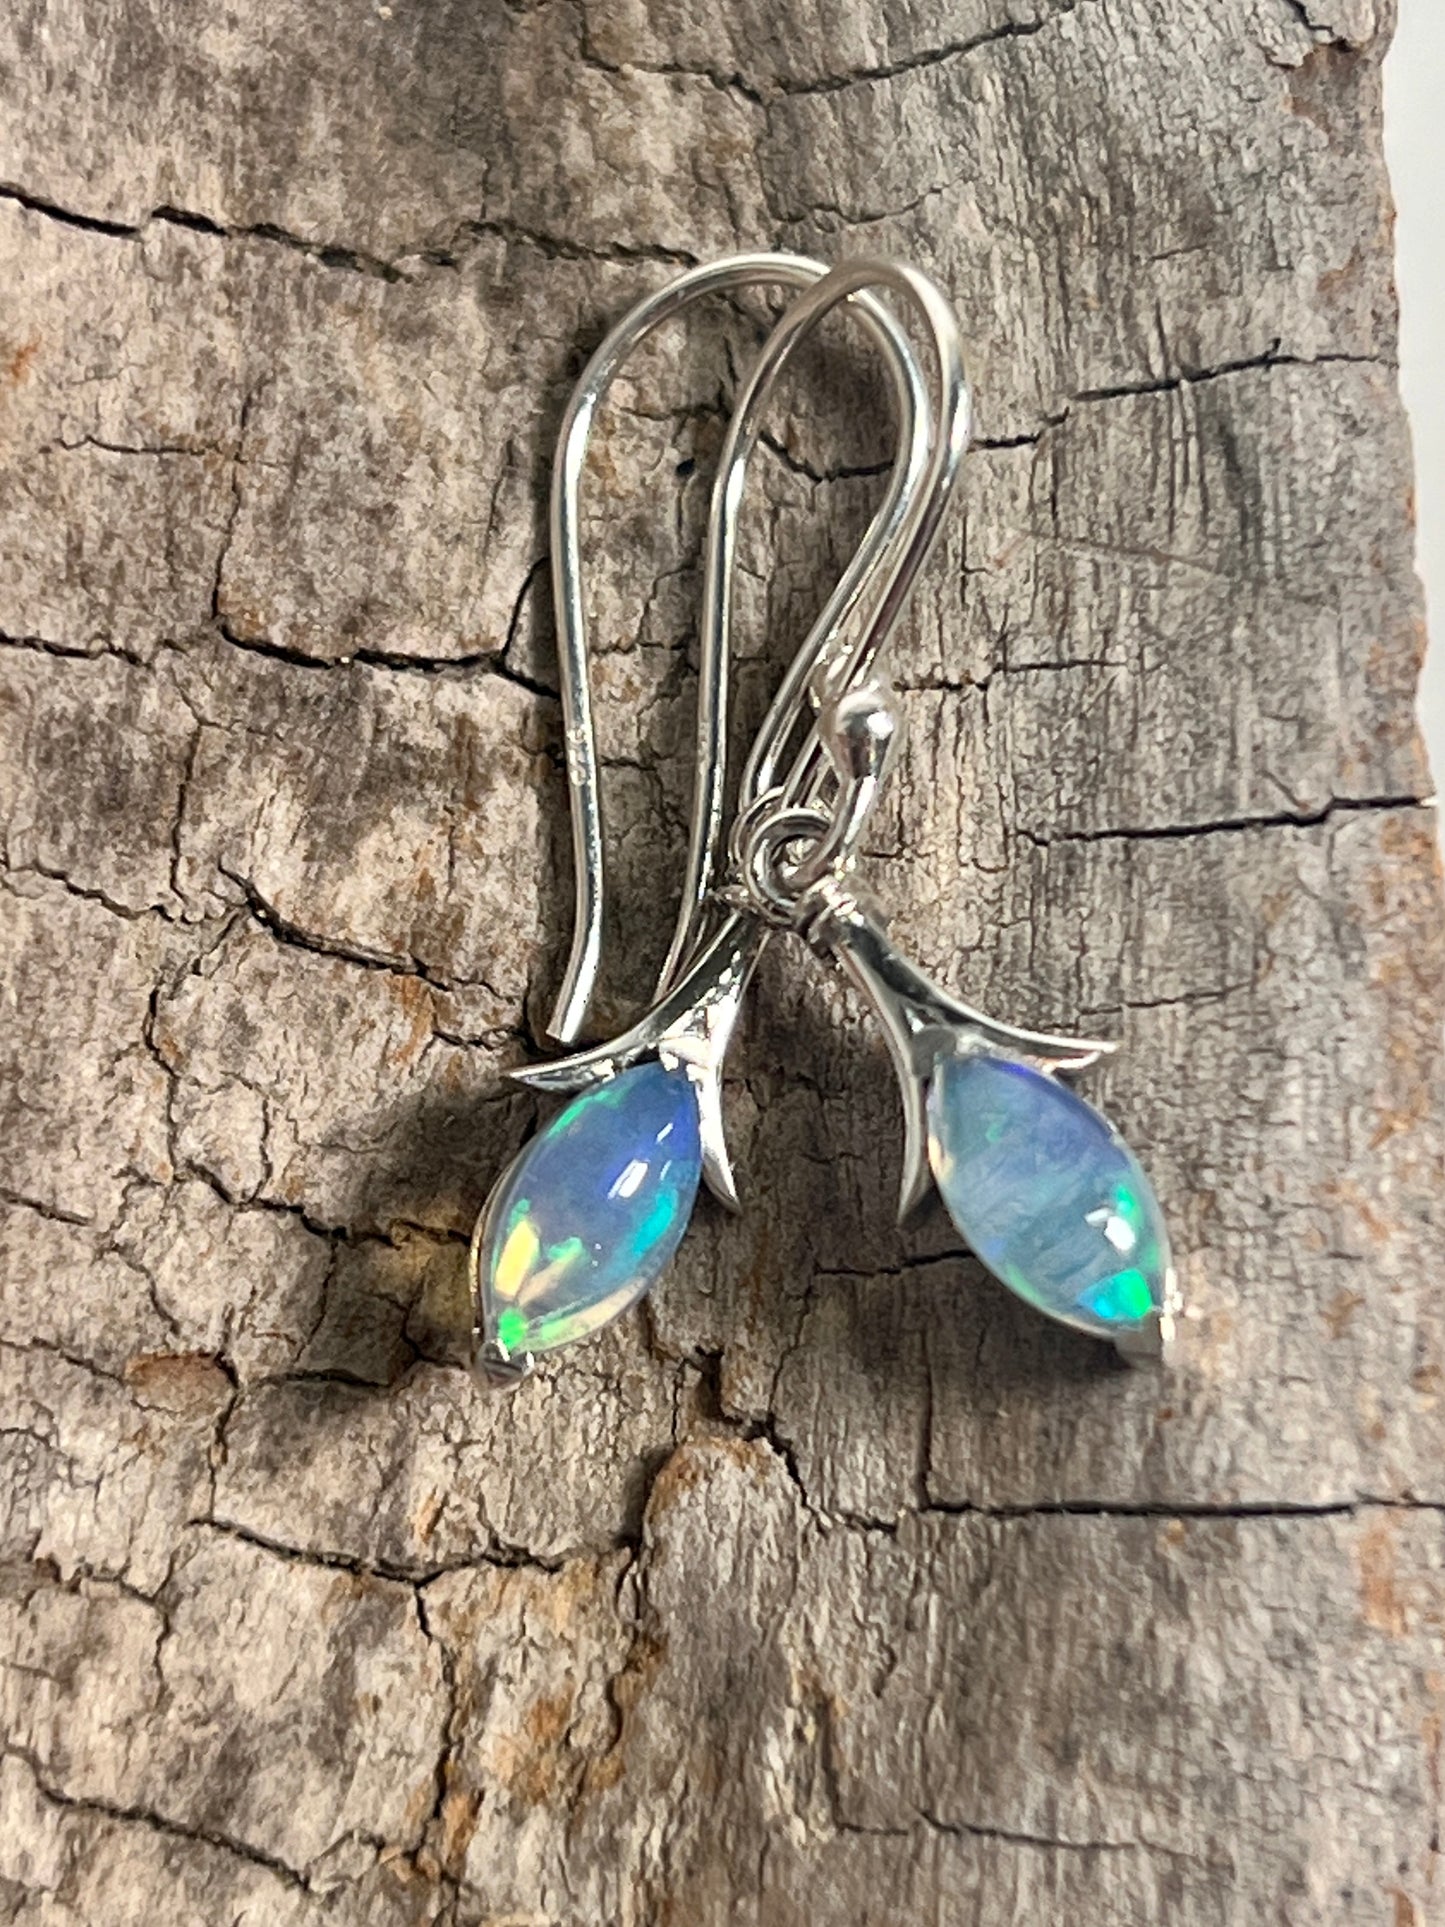 A pair of Modern Marquise Shaped Ethiopian Opal Earrings made with Ethiopian opal pieces, beautifully displayed on a piece of wood, by Super Silver.